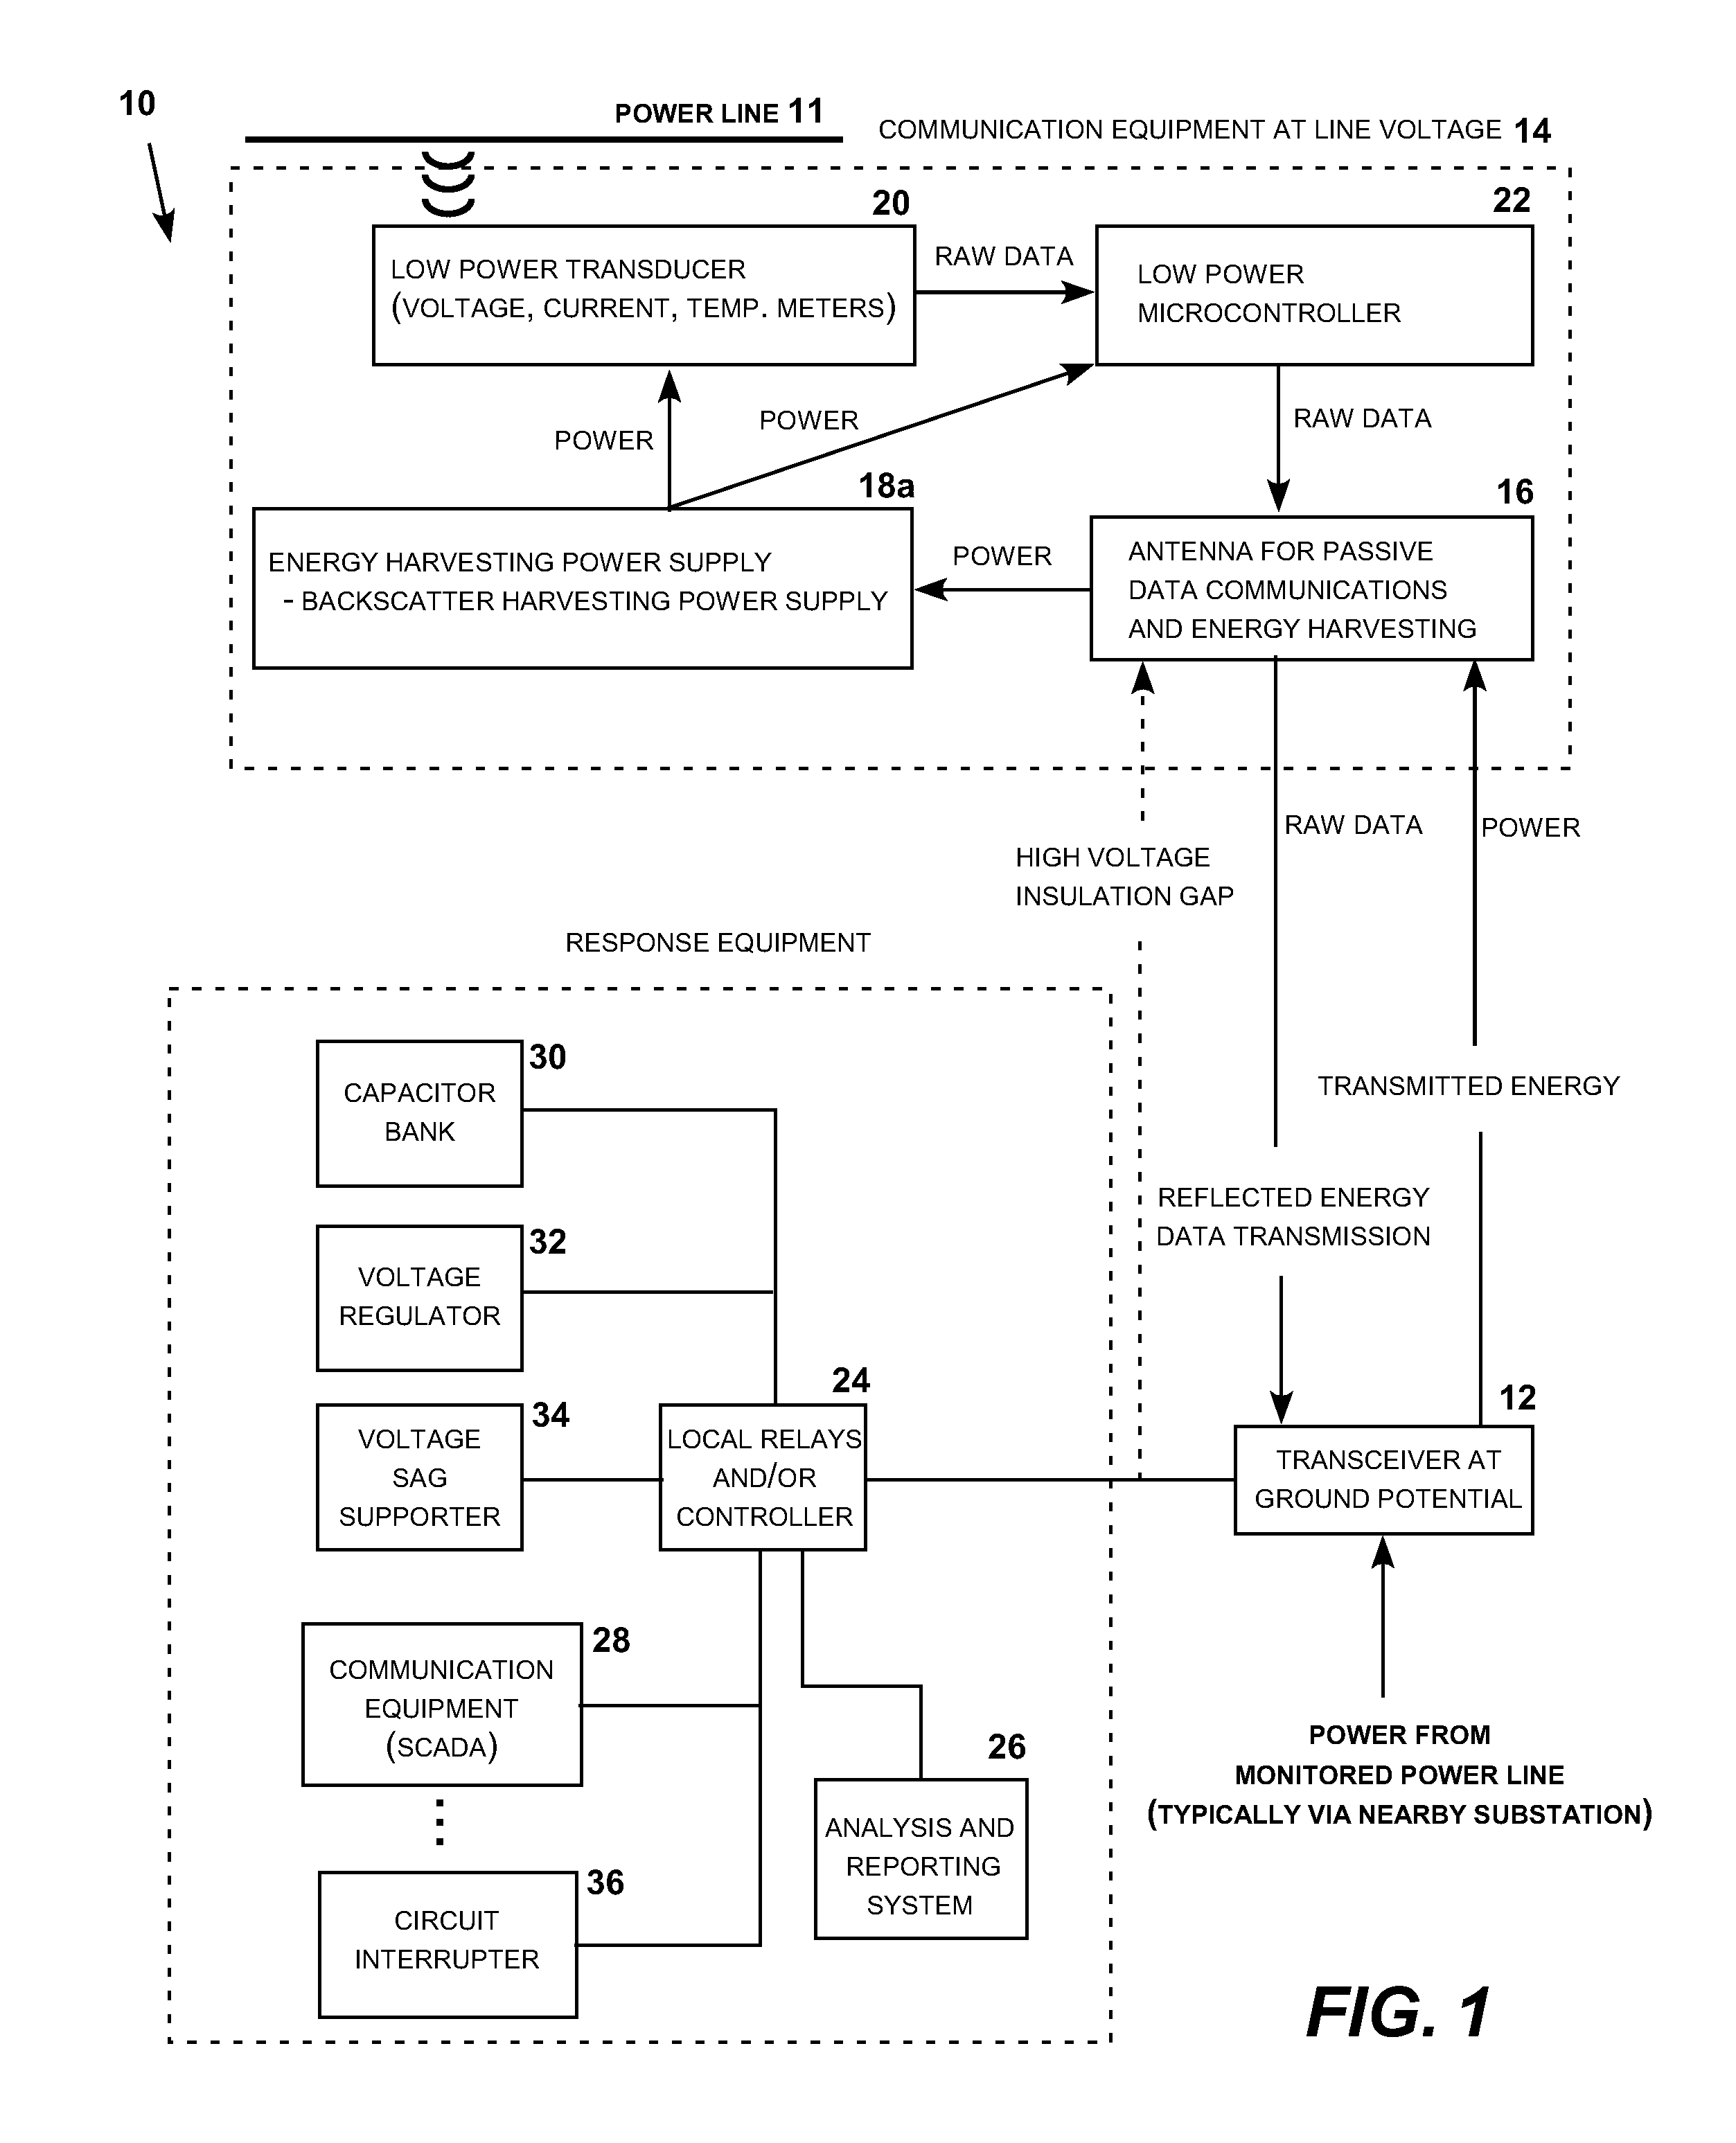 High voltage power line communication system using an energy harvesting power supply